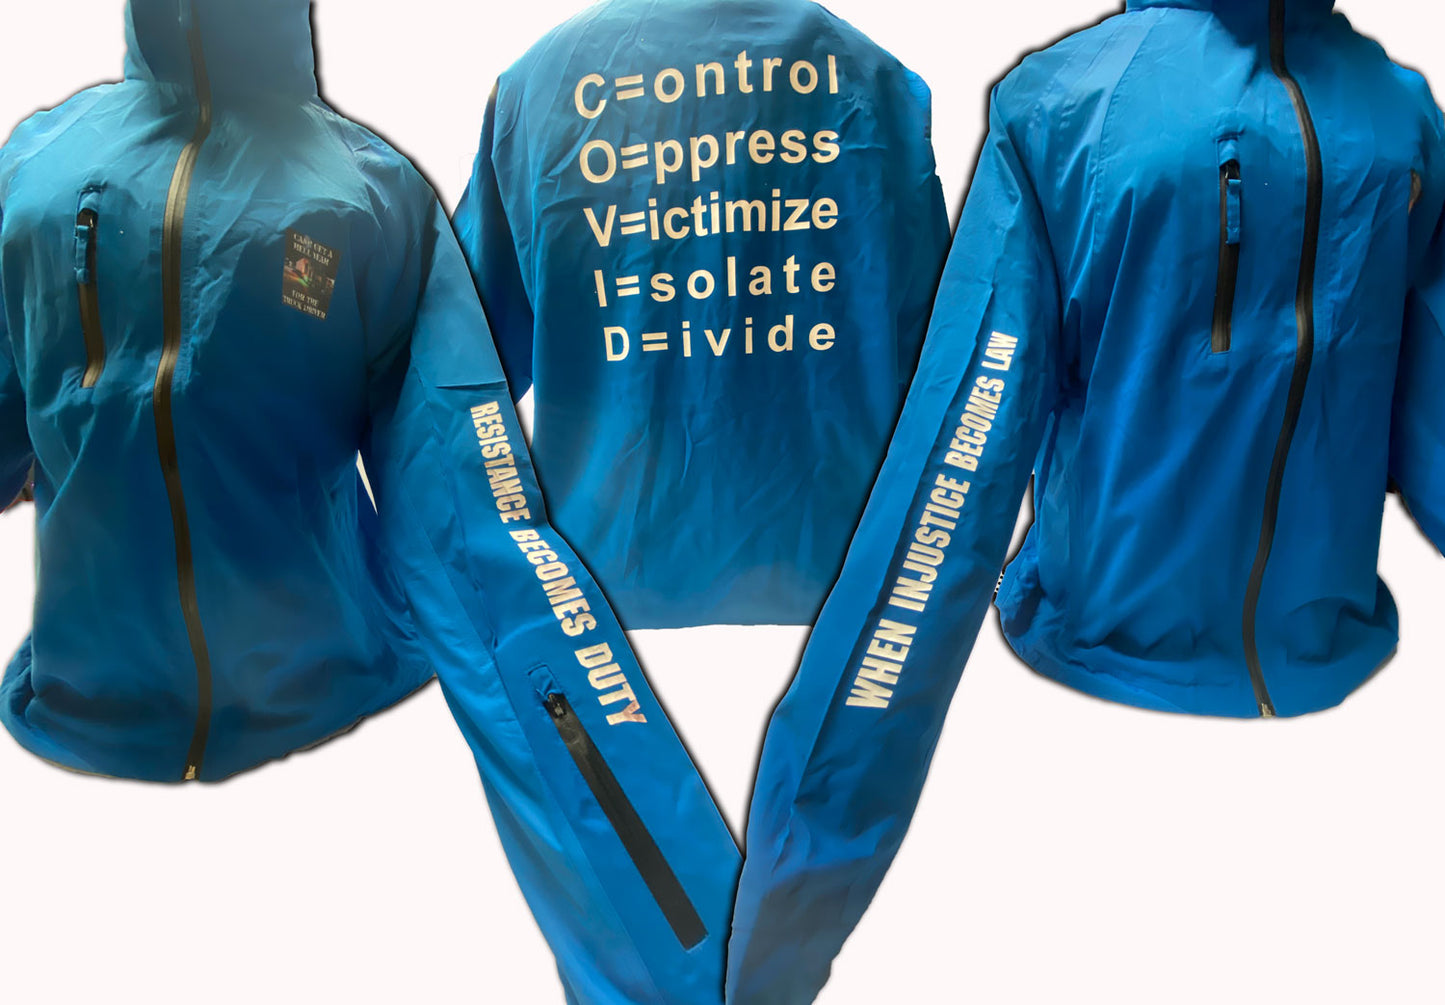 PANDEMIC Jacket in bright blue - Text on arms and back